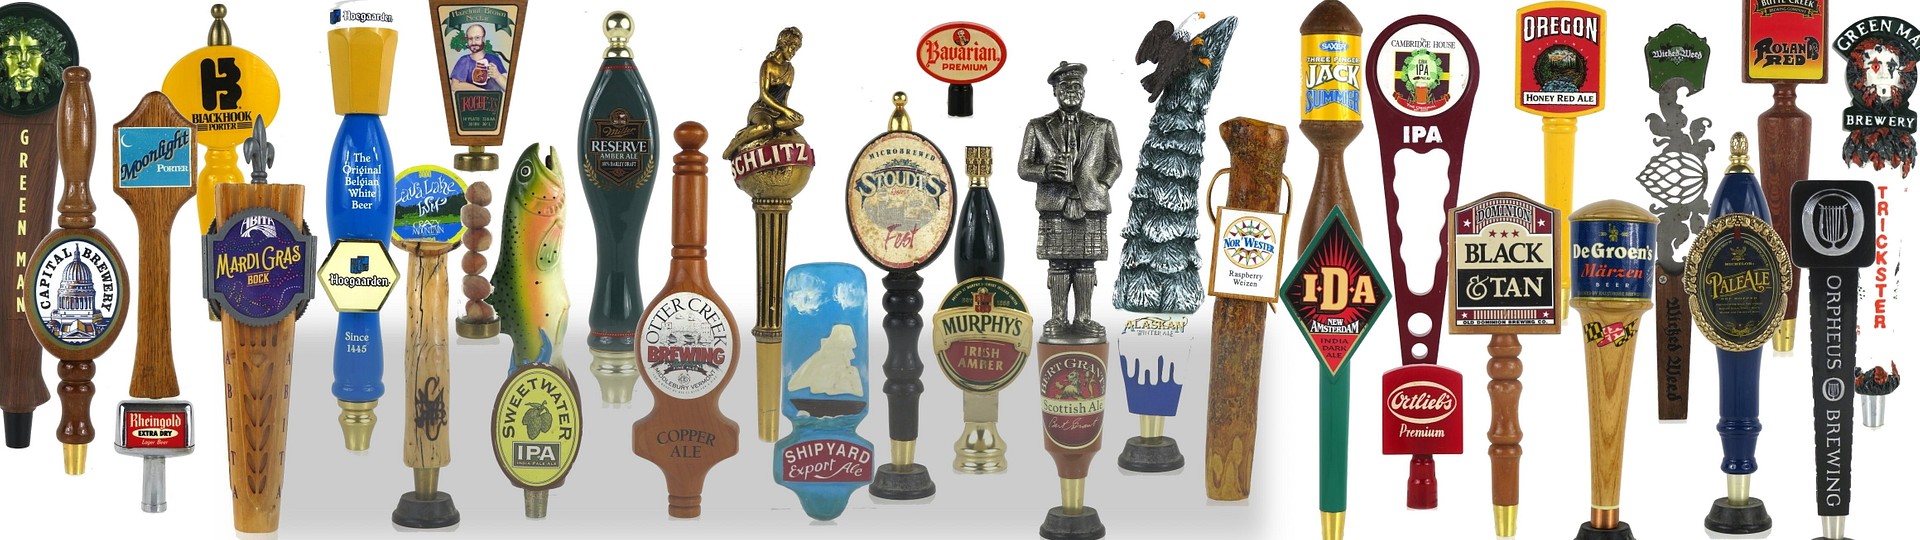 TavernTrove's Vintage US, Craft Brewery, and Foreign Beer Tap Auction (Day 3) by TavernTrove